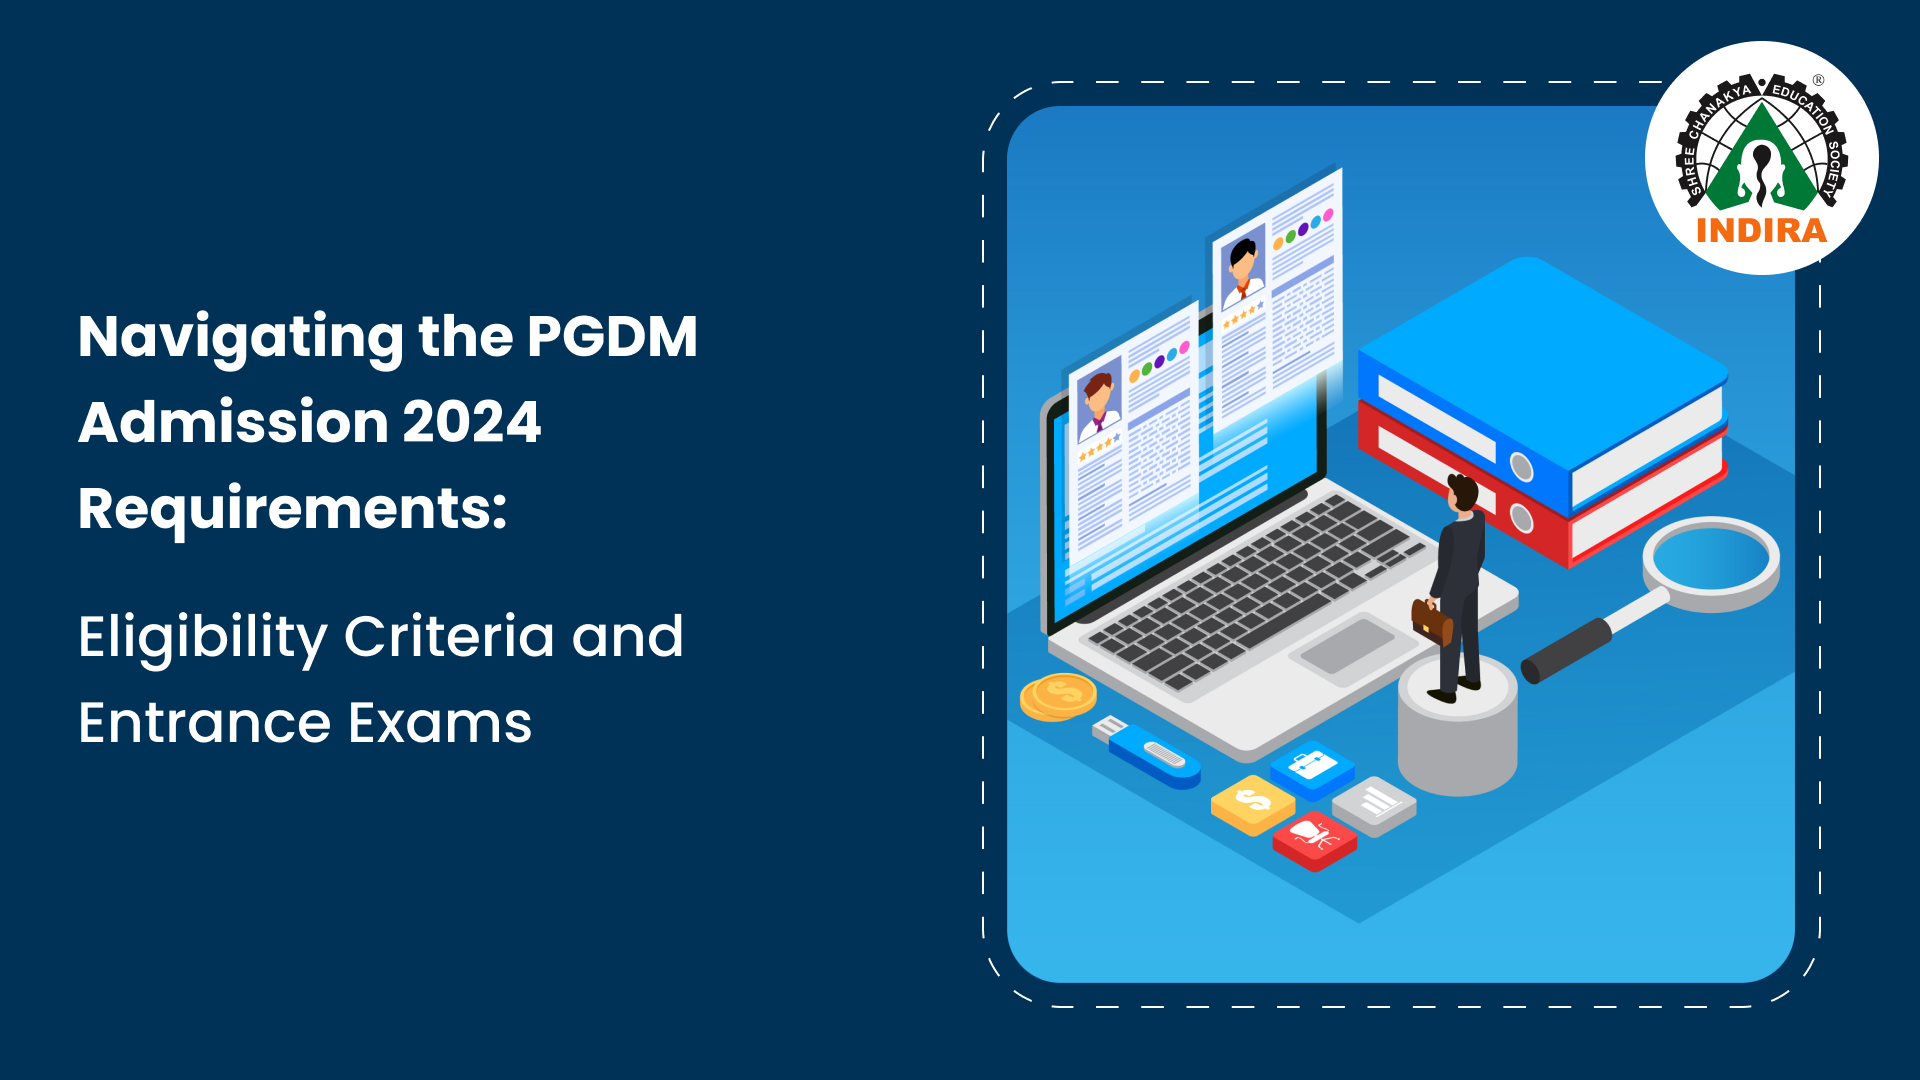 Navigating the PGDM Admission 2024 Requirements